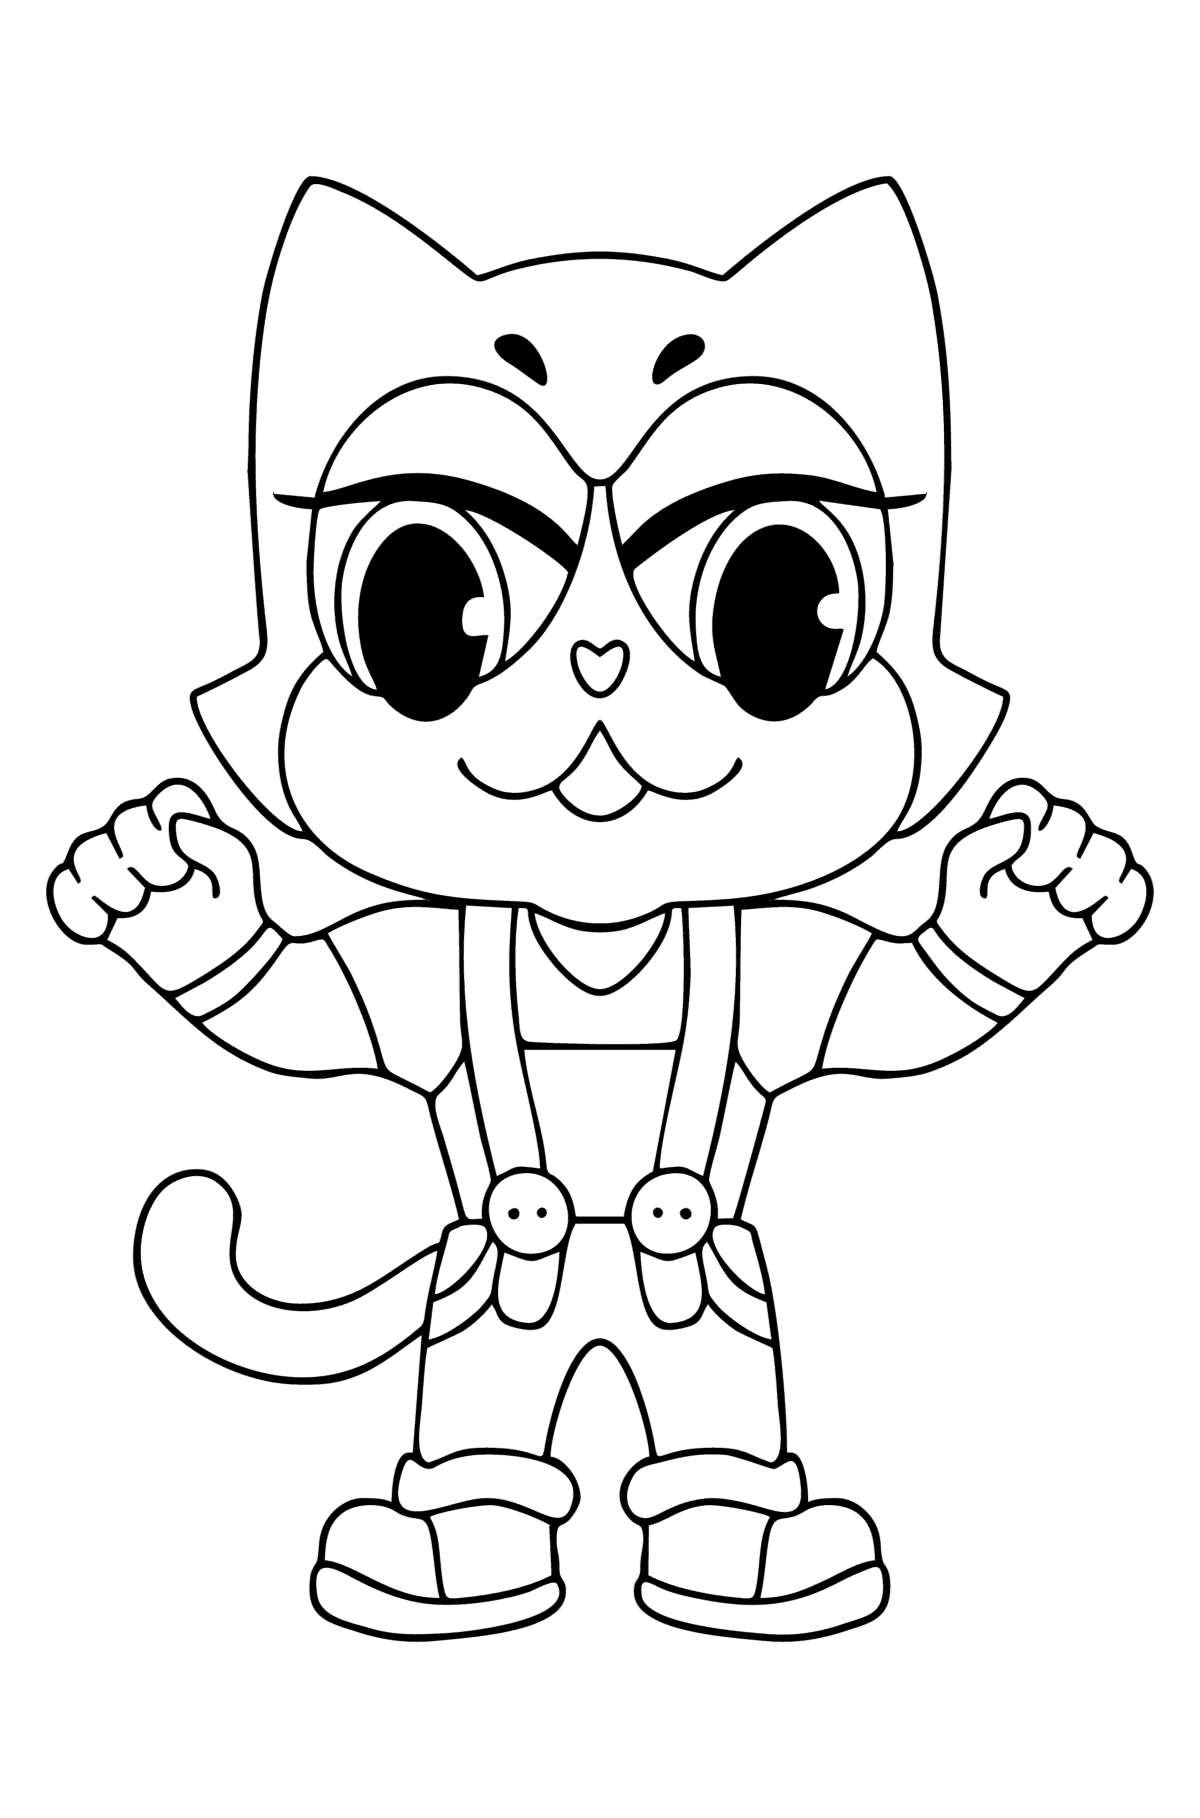 Fortnite Funko POP Meowscles coloring page - Coloring Pages for Kids